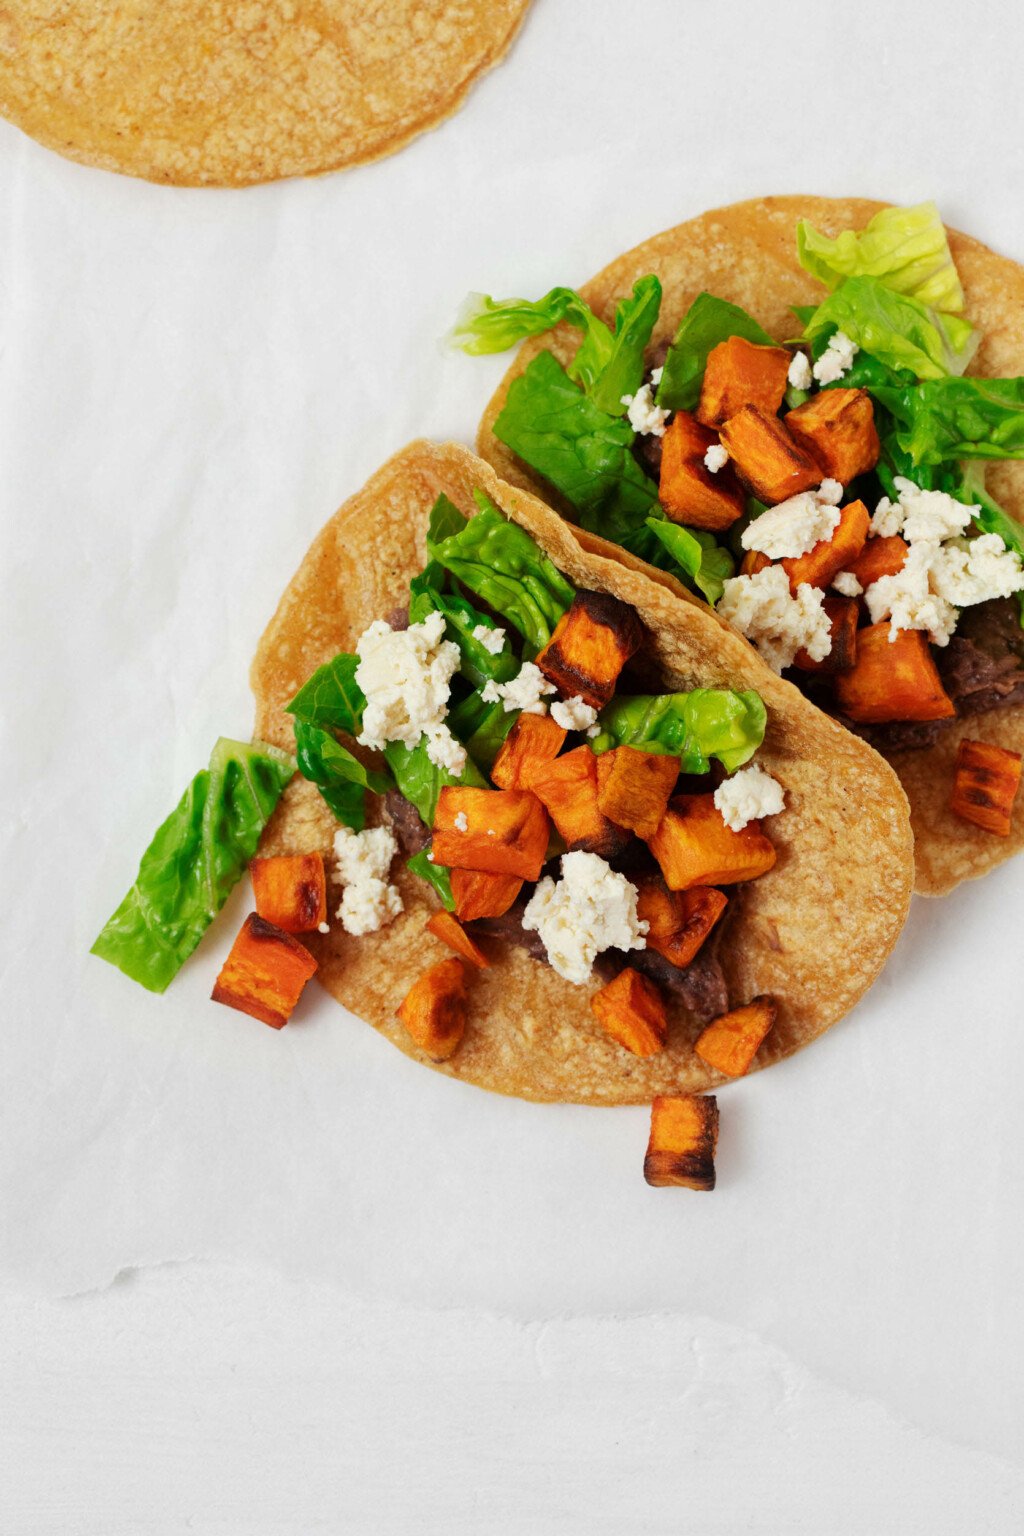 Vegan sweet potato tacos with black bean spread are plated on a white surface. They contain chopped lettuce.